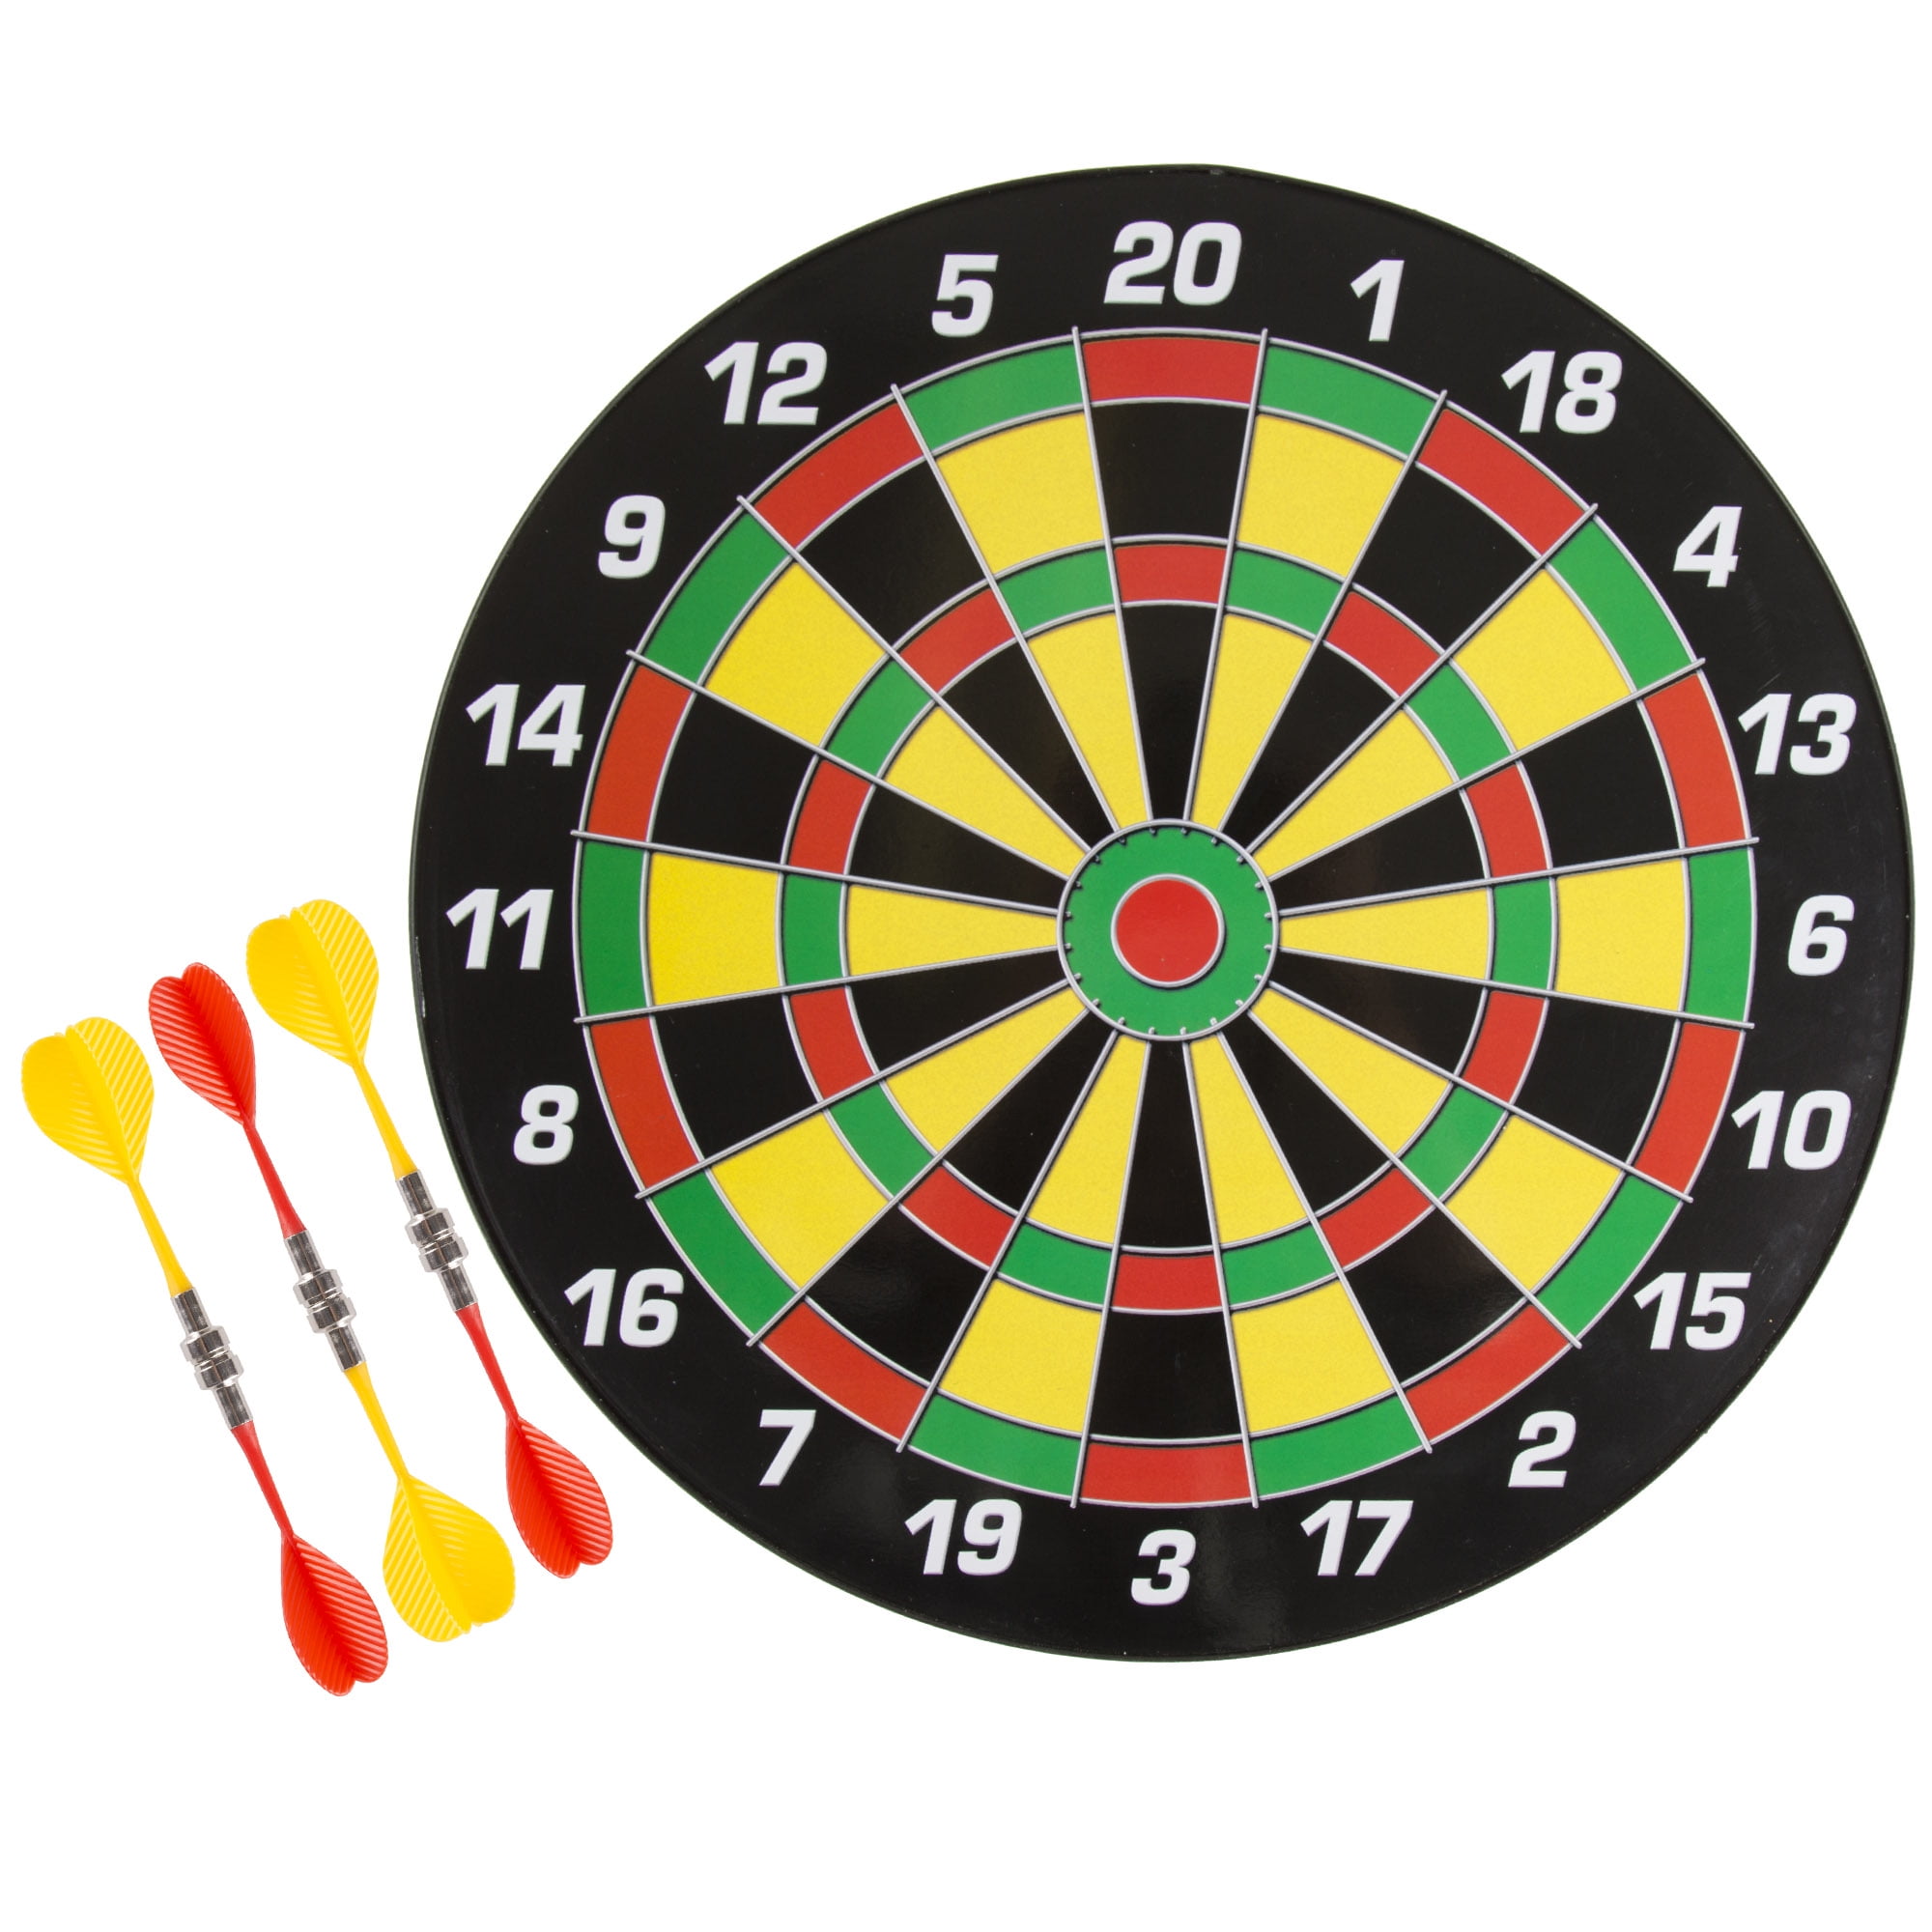 16" Inch Magnetic Dart Board Dartboard Game Play For Adults Or Kids With 6 Darts 